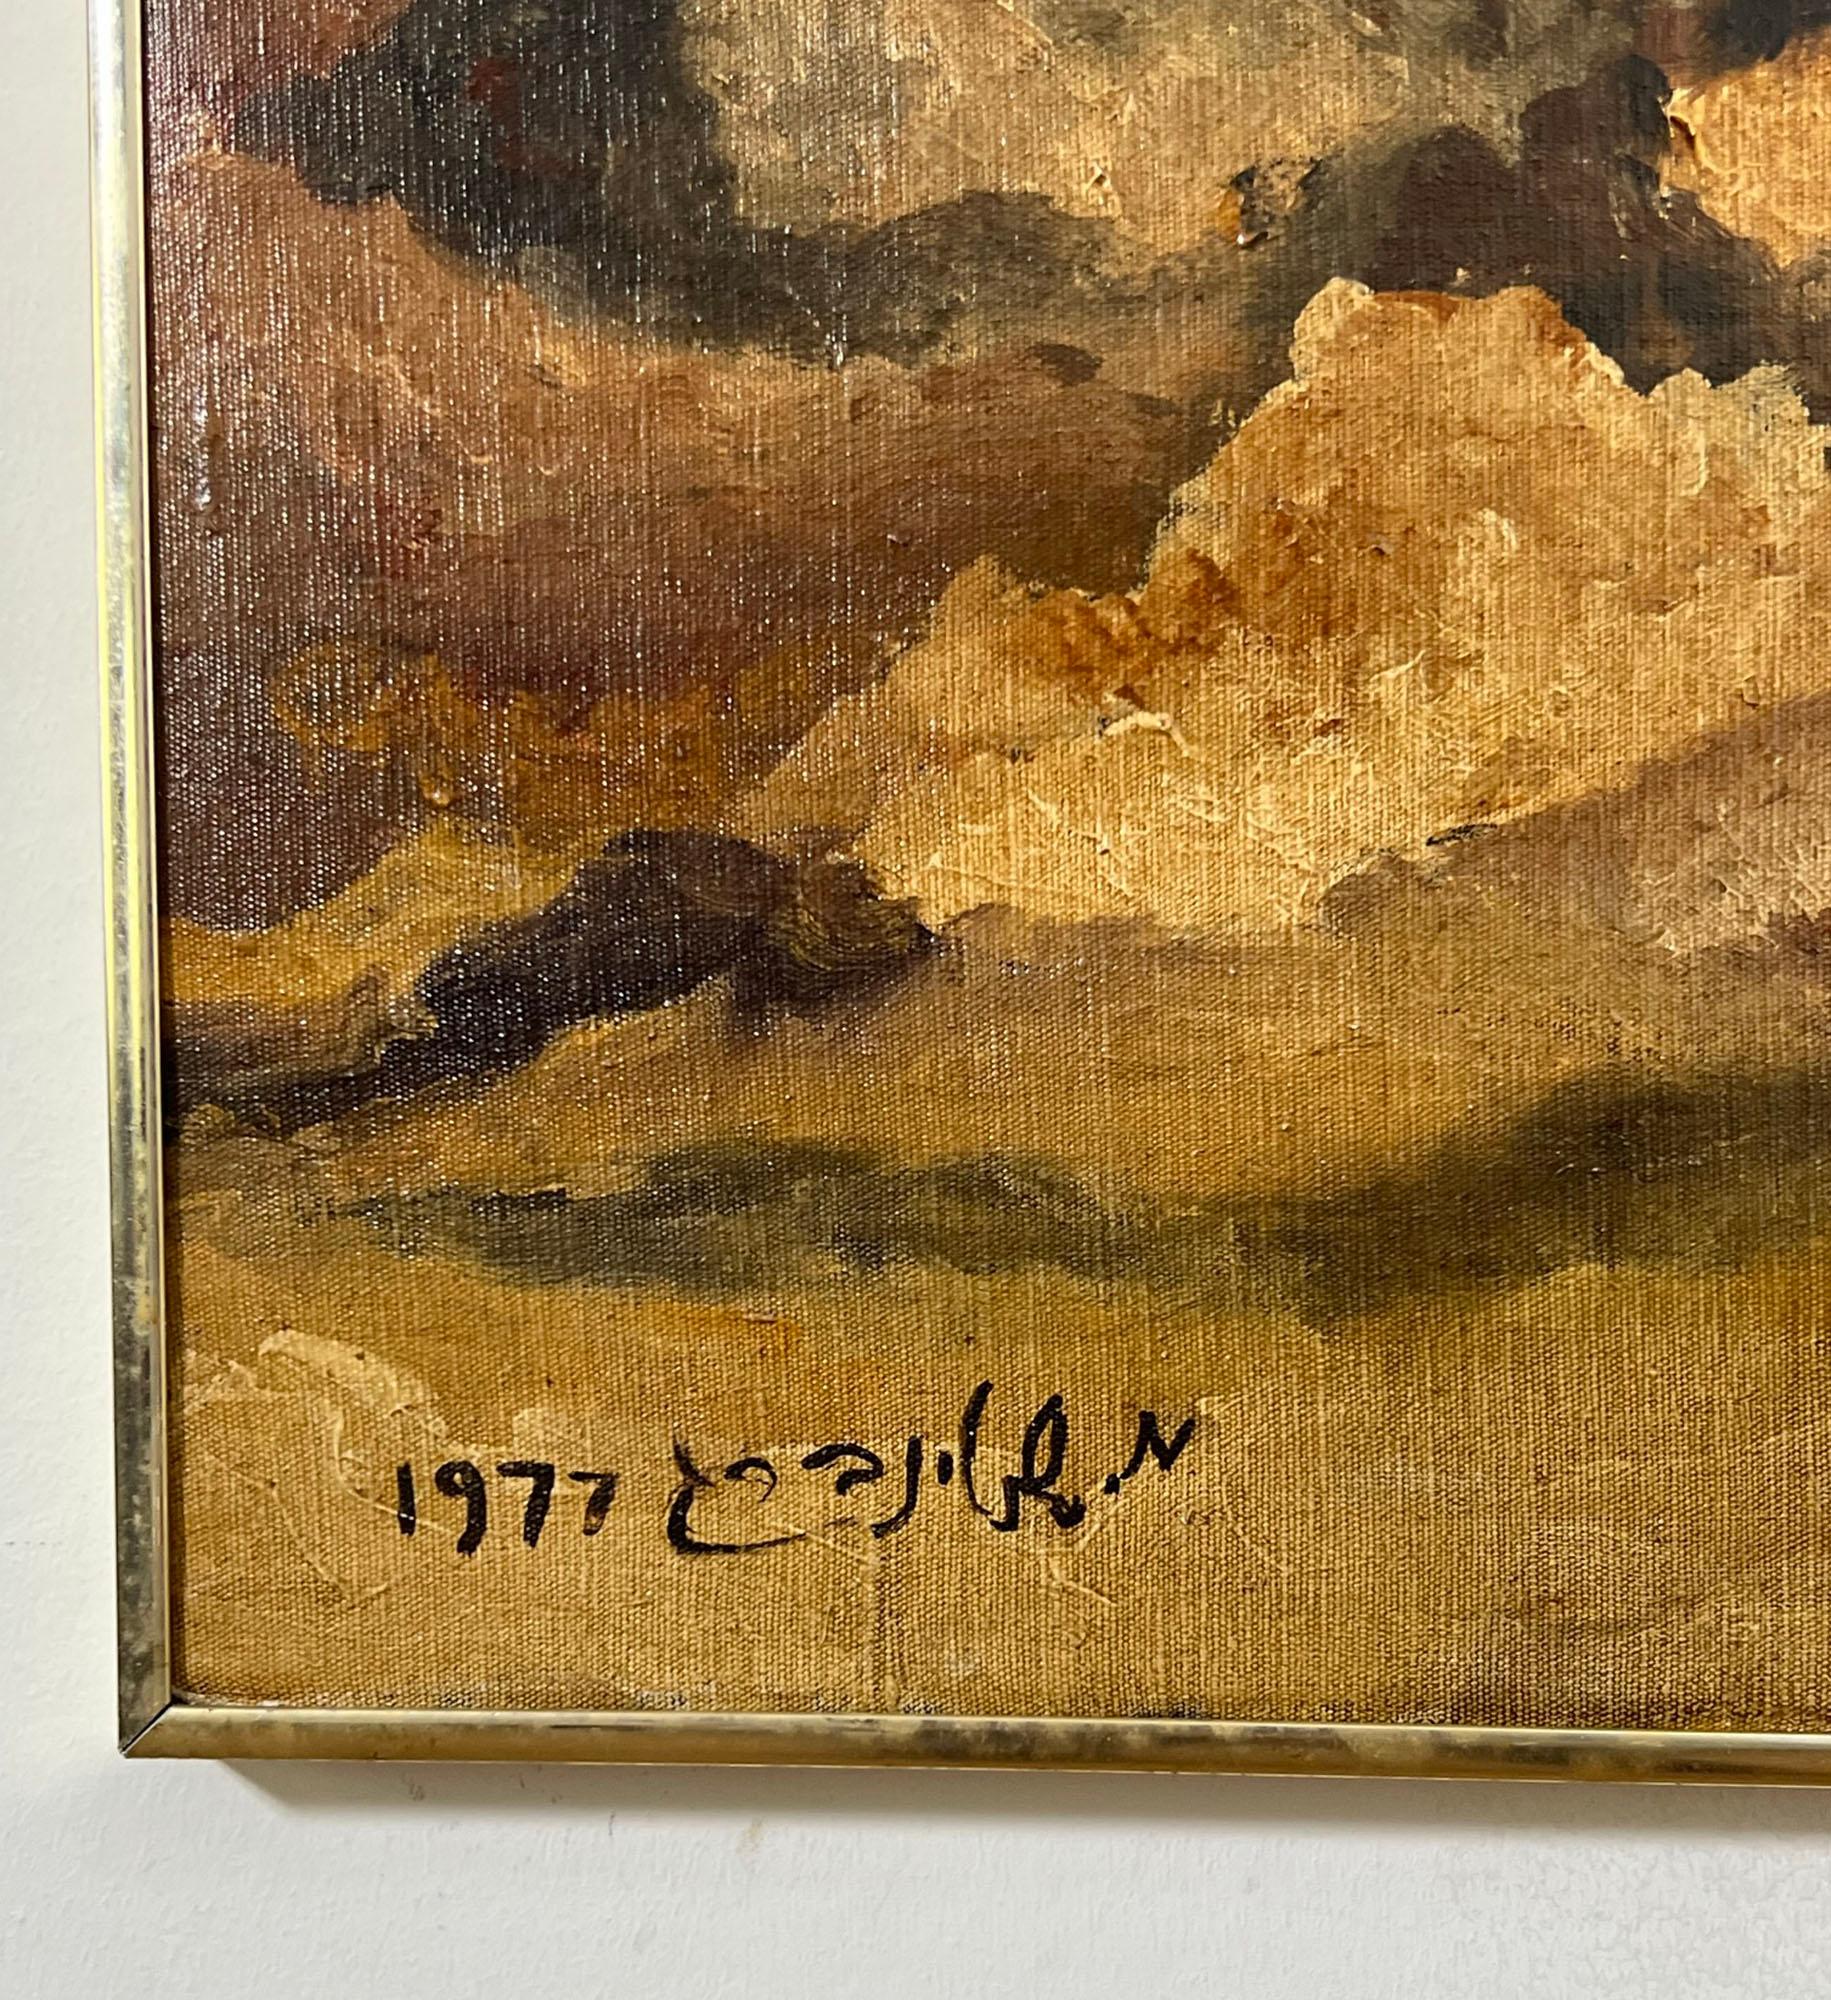 Modernist landscape painting depicting the mountainous region where the ancient fortress of Masada once stood in southern Israel. Dated 1977, and signed in Hebrew, M. Steinberg, making it most likely by the Ukrainian artist Michael Steinberg, who